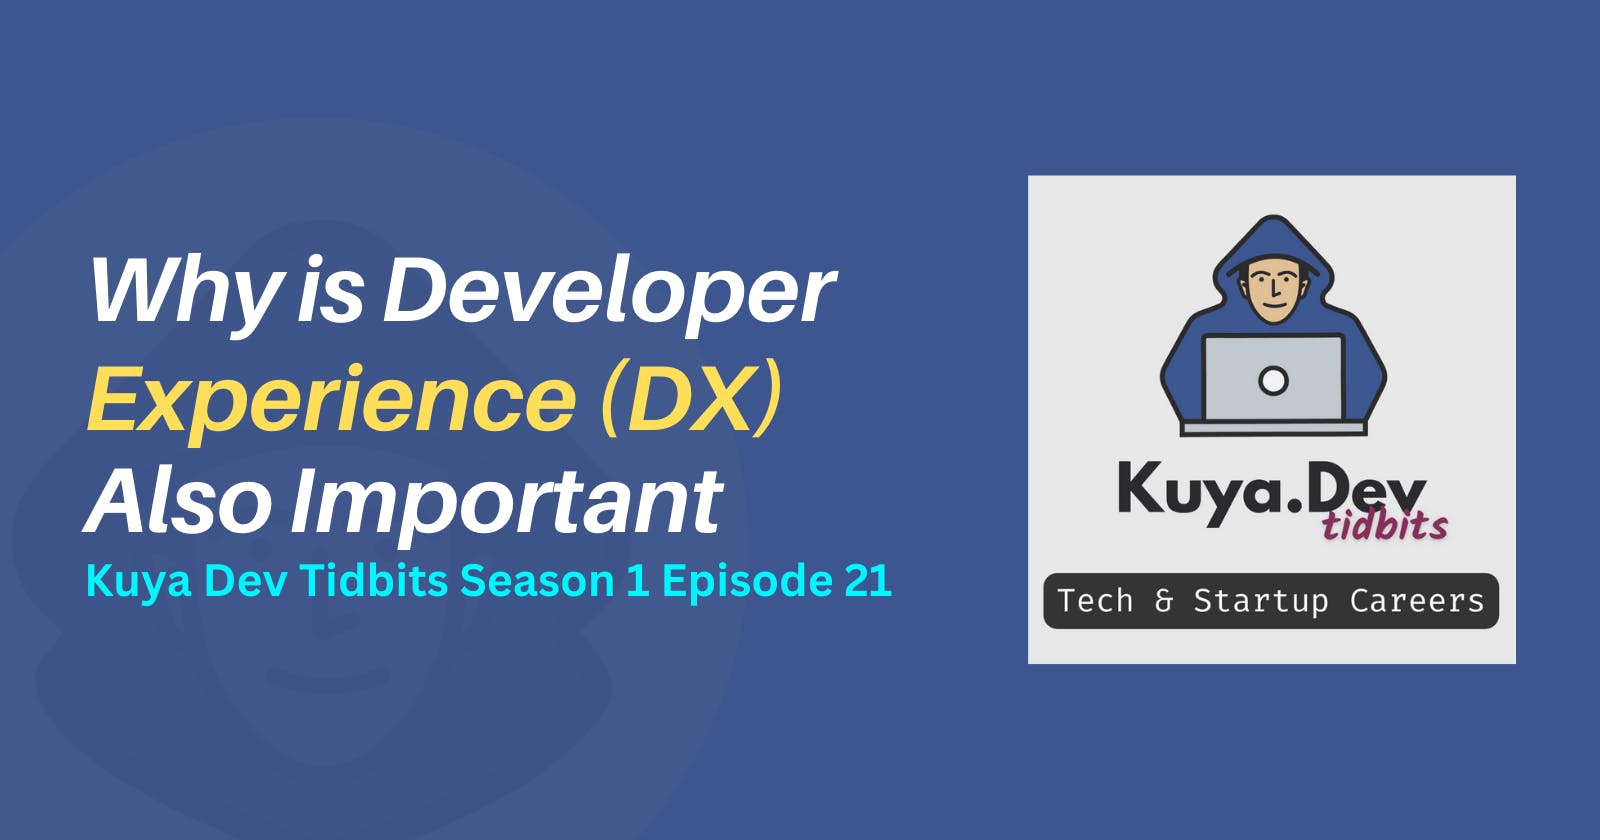 Why Developer Experience (DX) is Also Important